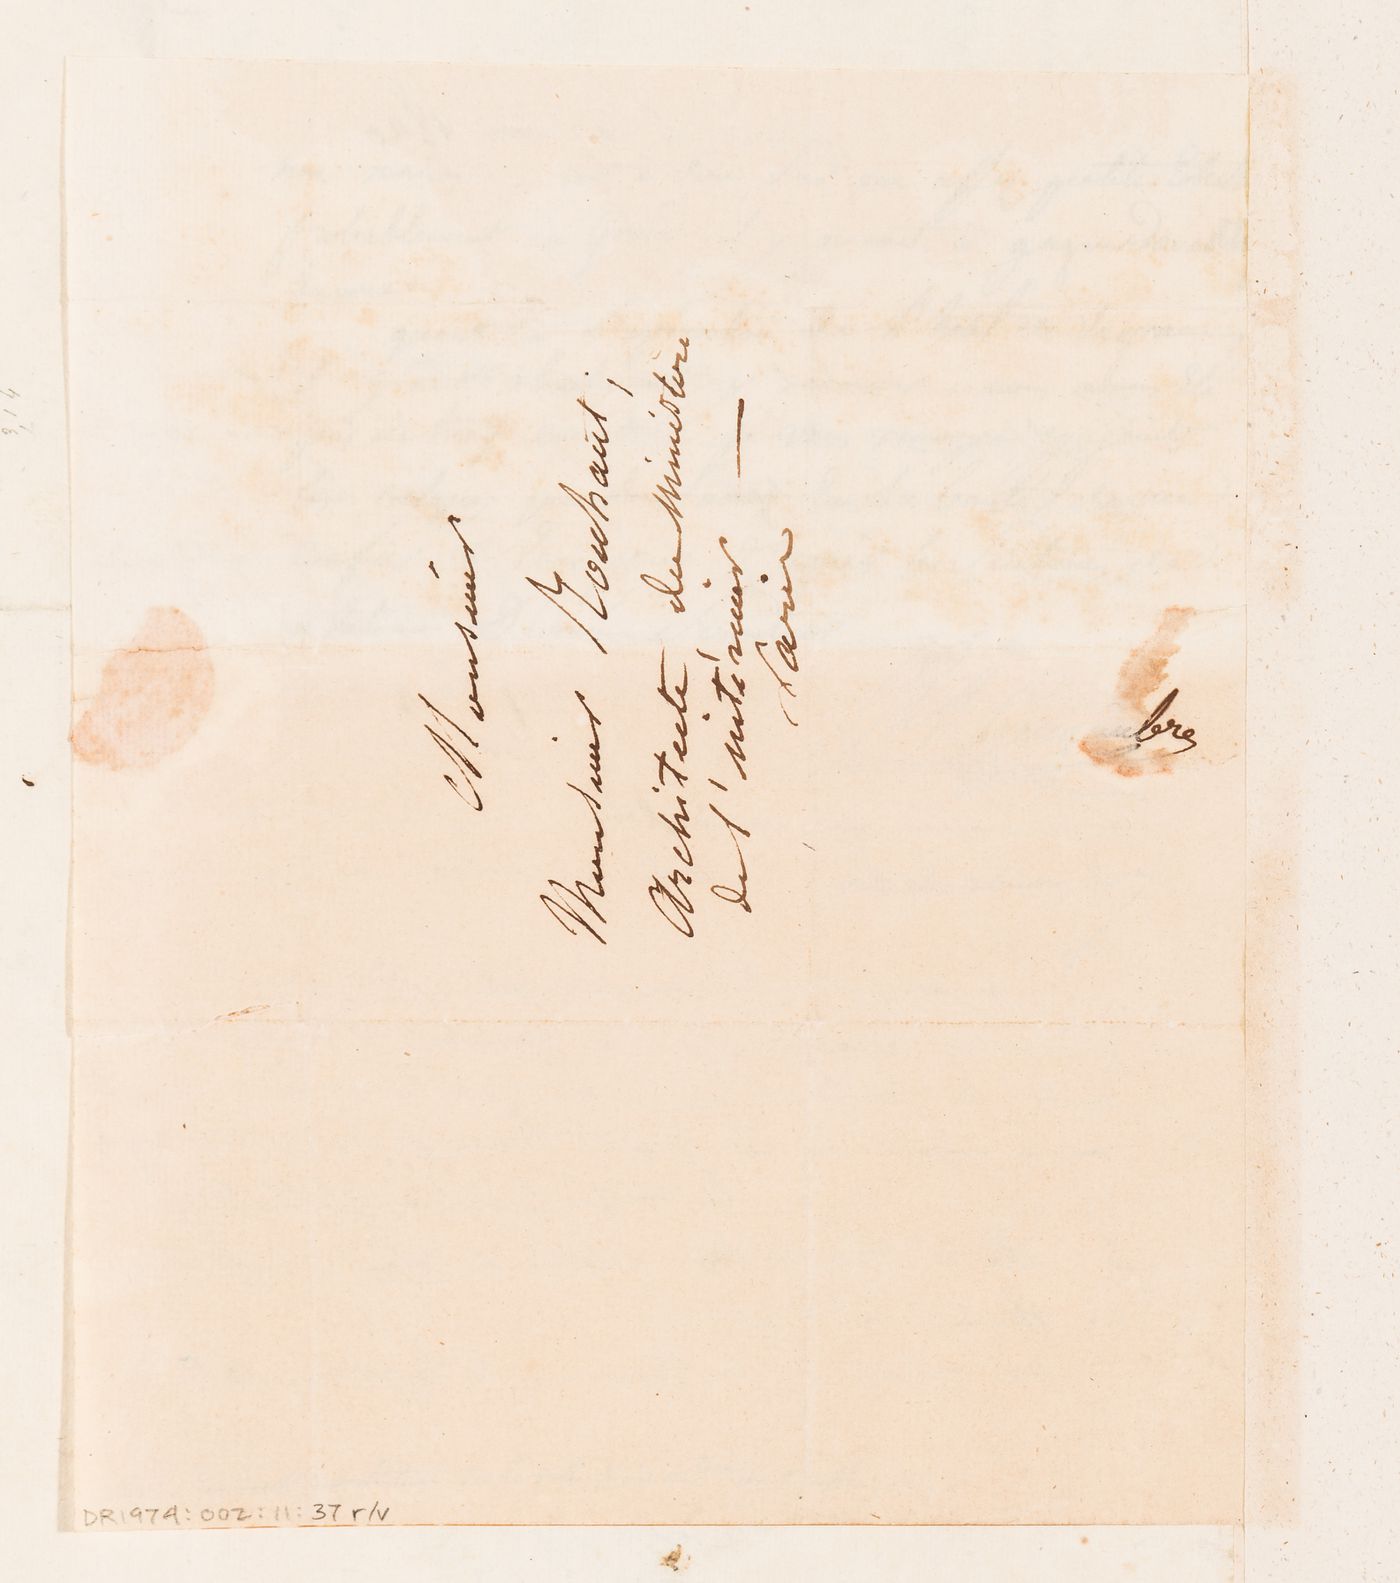 Letter to Rohault de Fleury from an unidentified correspondent, 6 March 1820